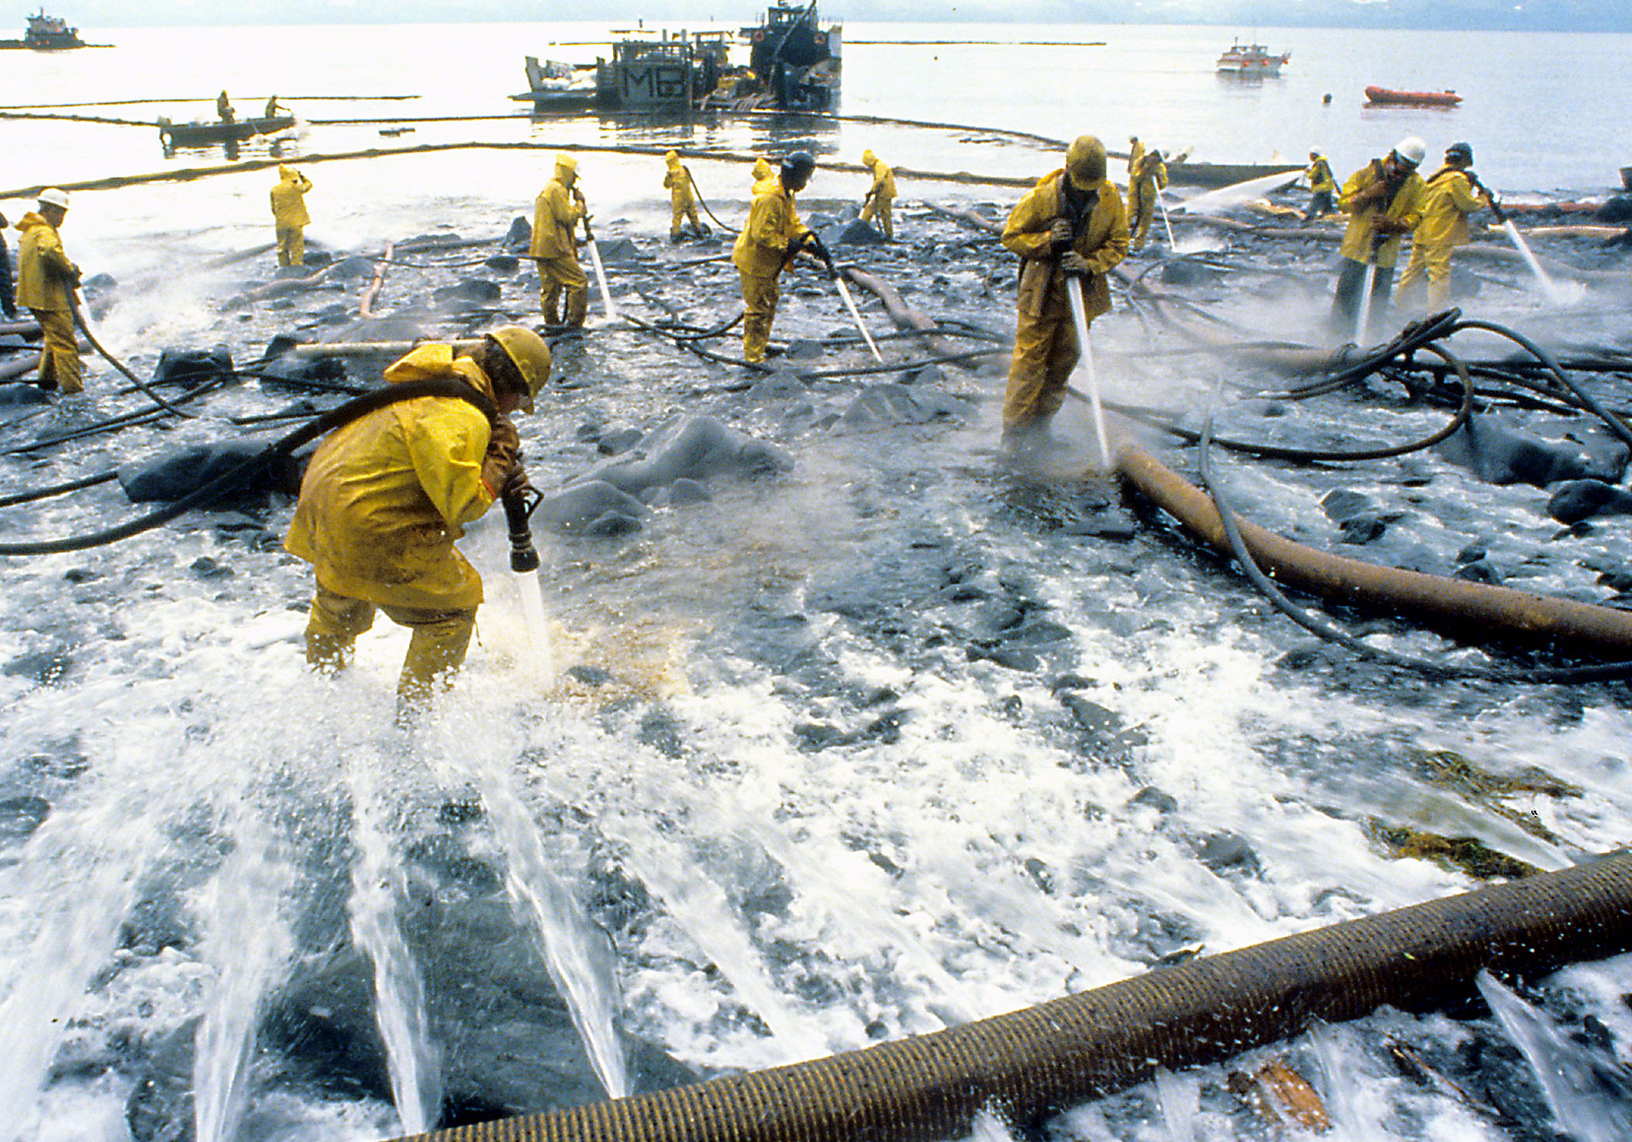 Fiction From LA Times: Global Warming Caused Exxon-Valdez Oil Spill.